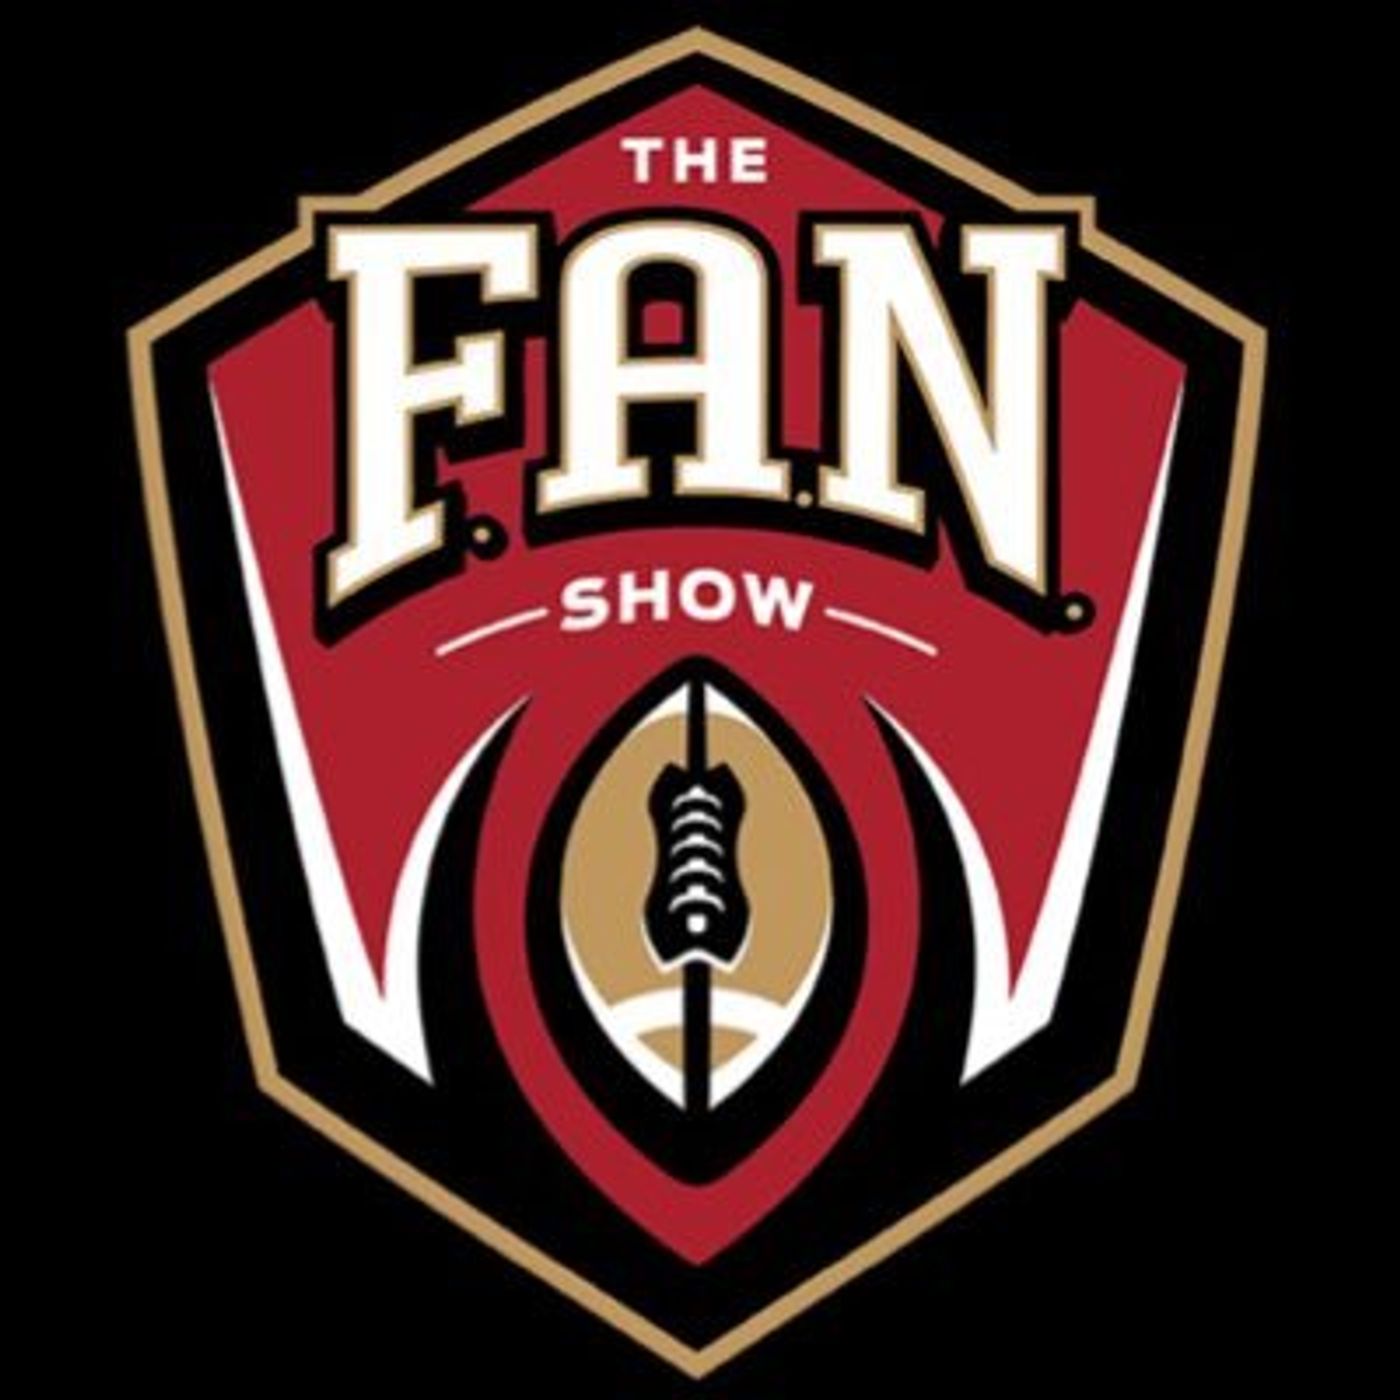 The F.A.N. Show